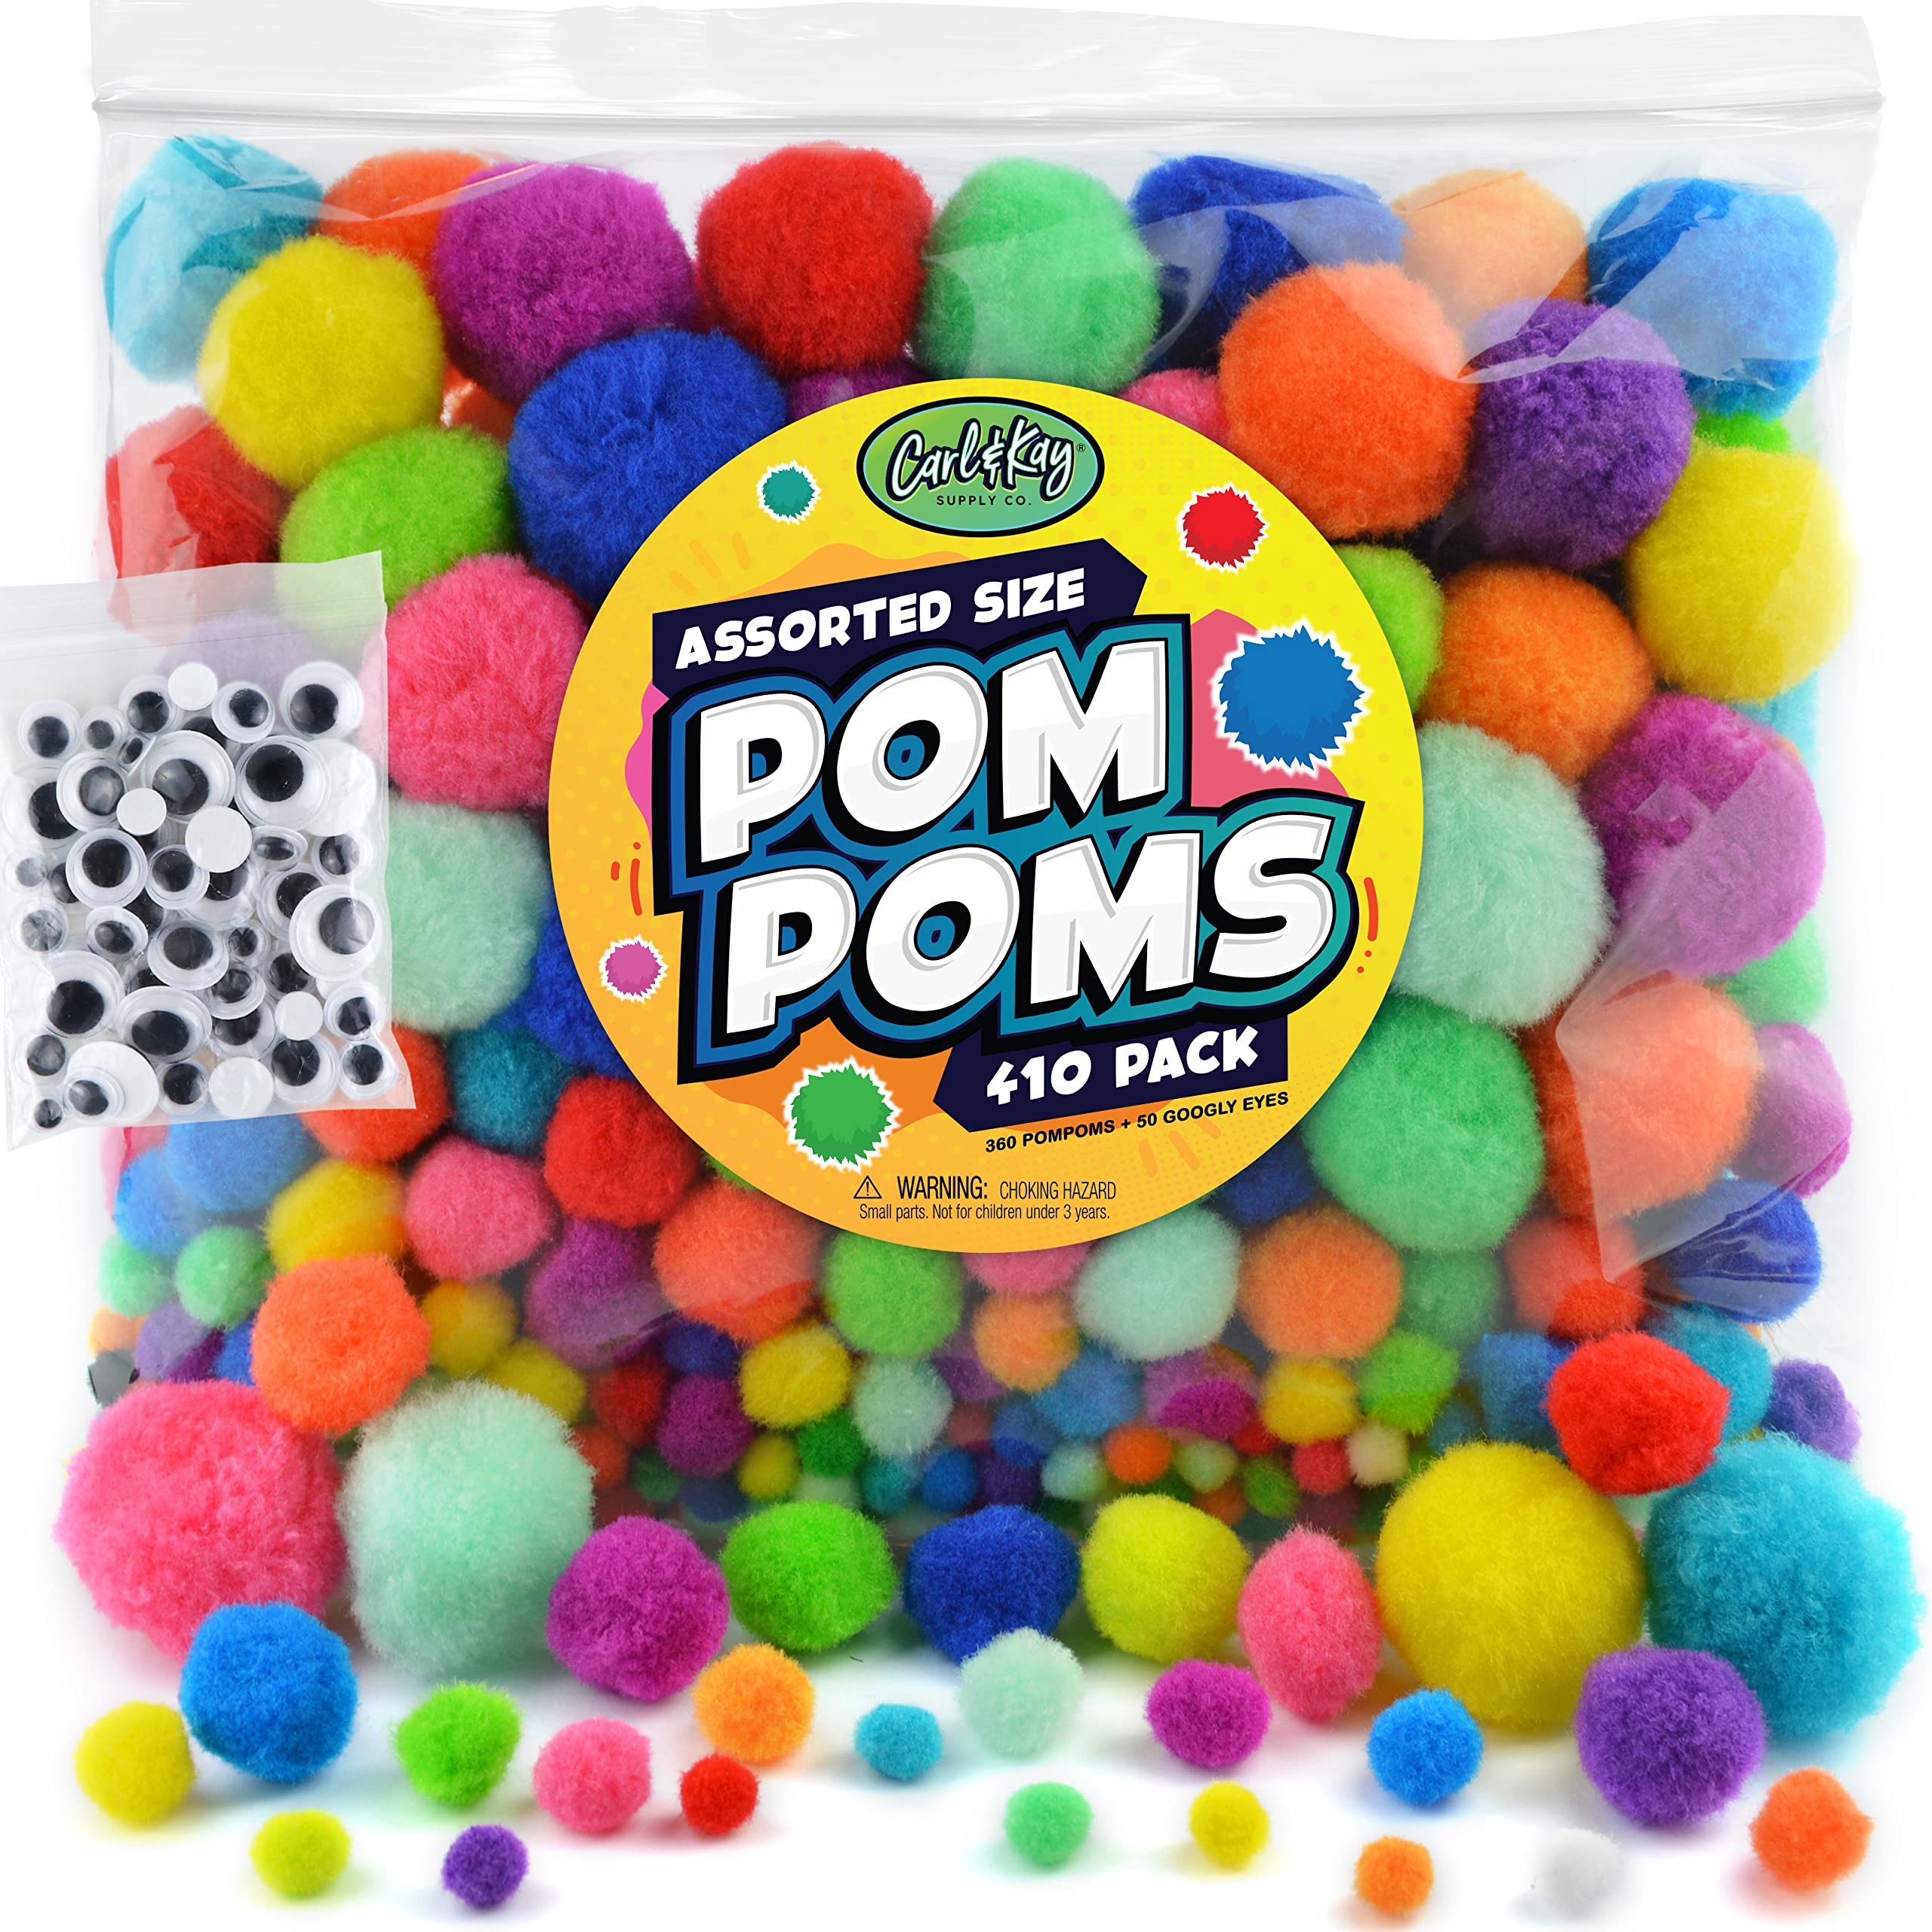 1500 Pieces Pompoms for Crafts,Small Size 1CM Small Pom Poms for Crafts,Pompoms